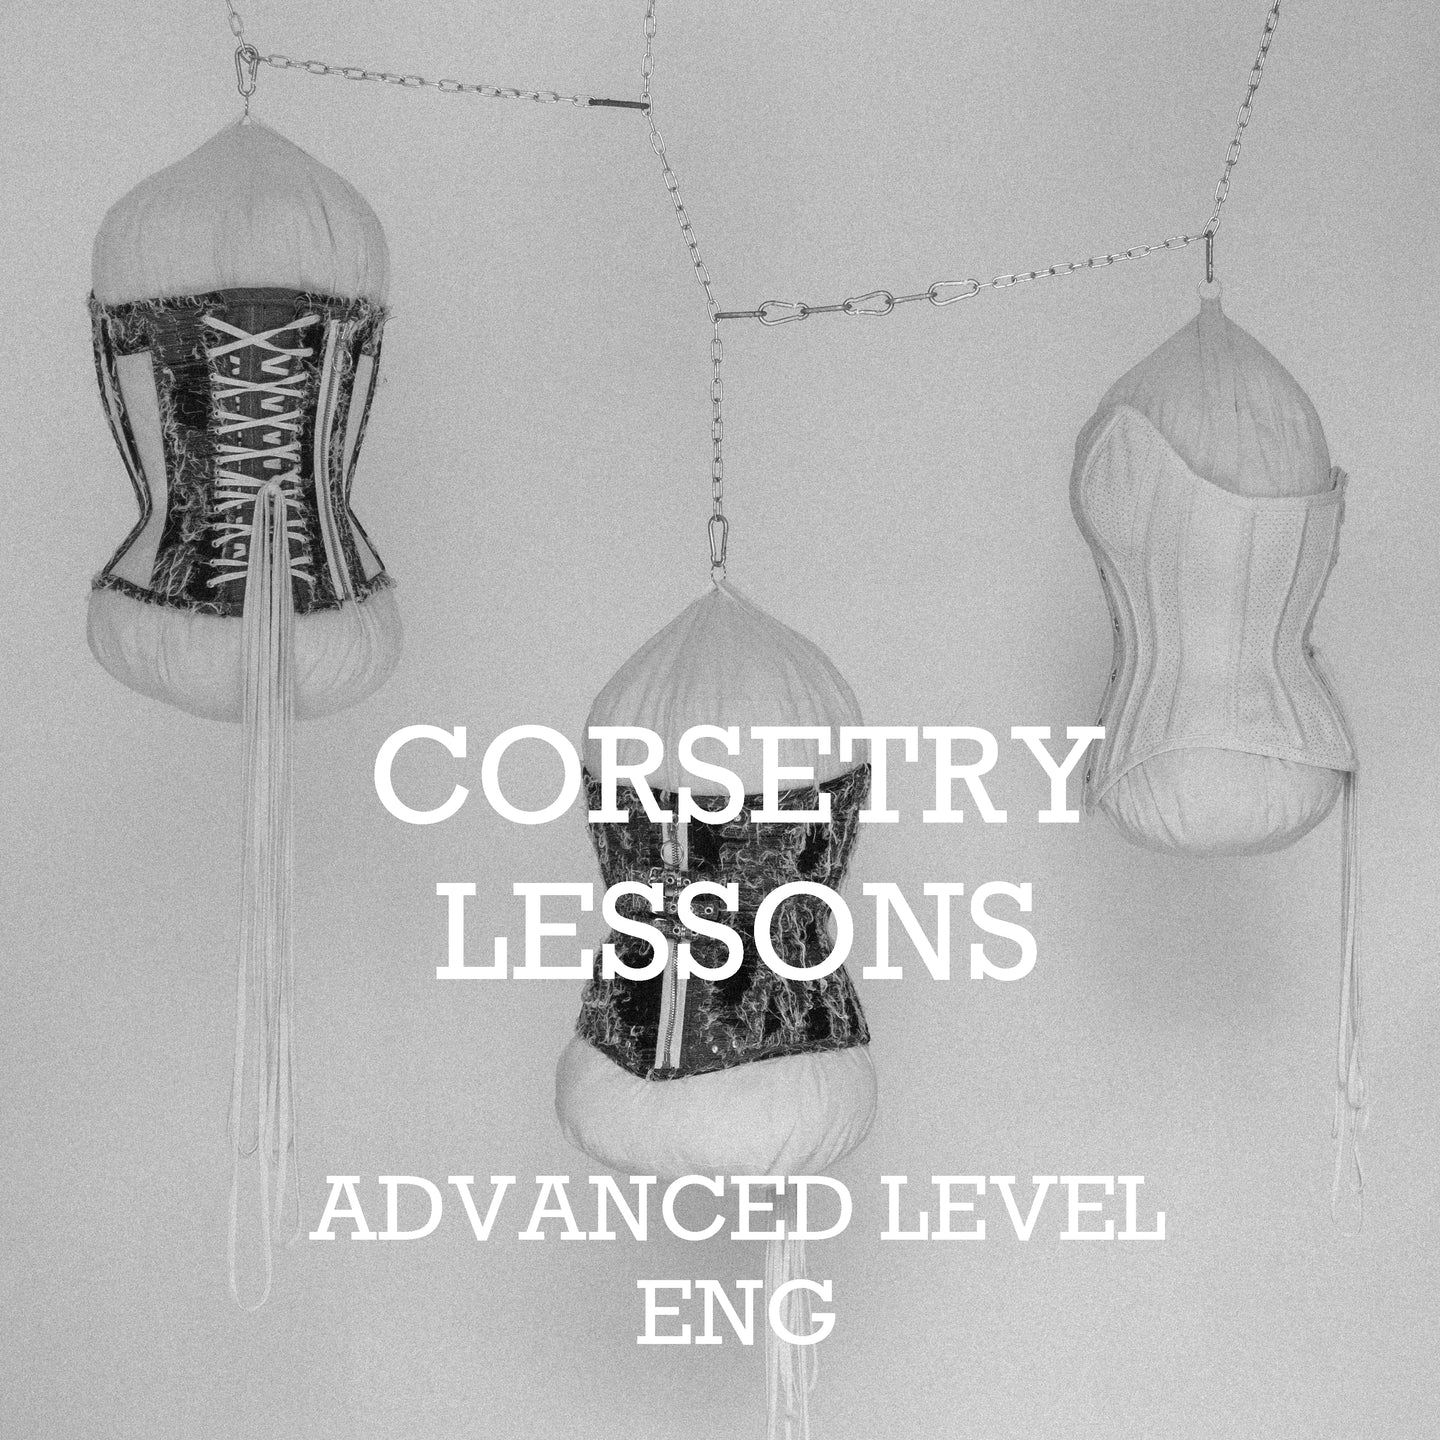 CORSETRY LESSONS - advanced level ENG